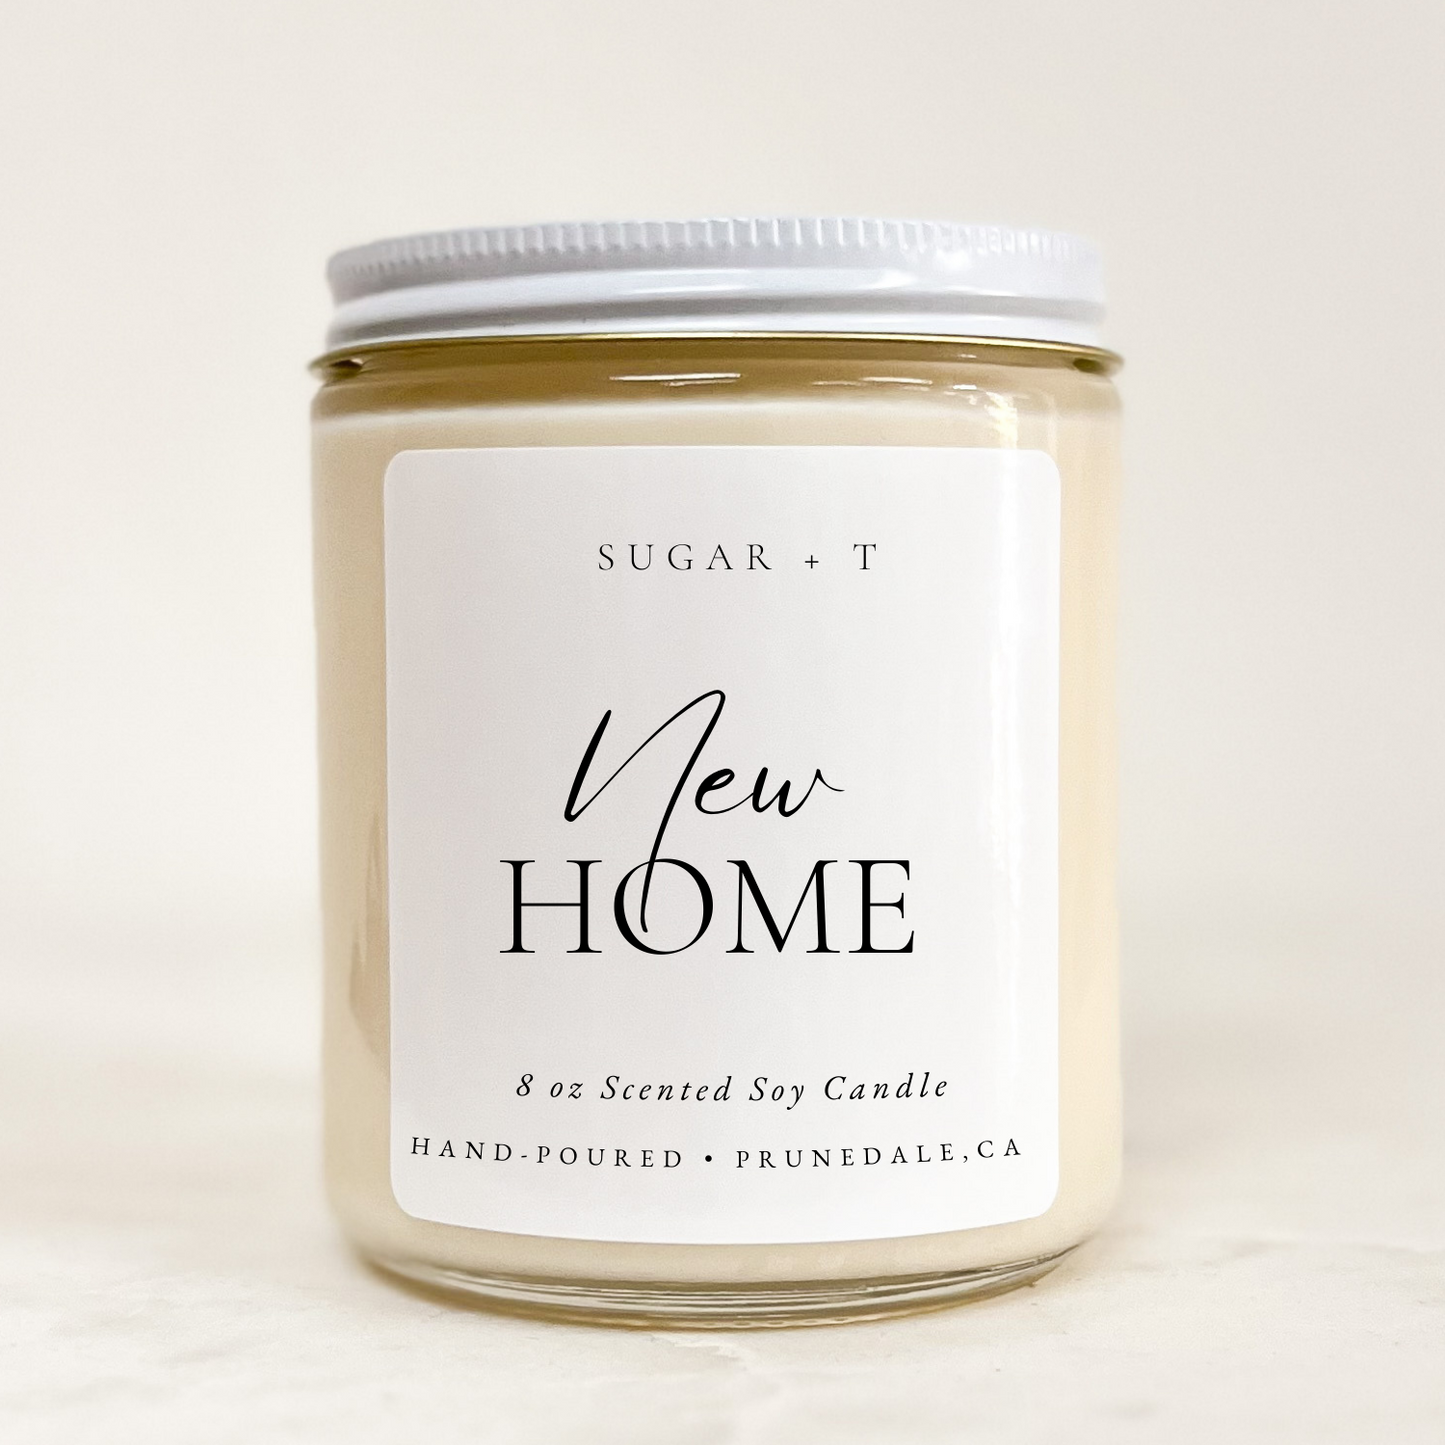 “New Home” Scented Candle